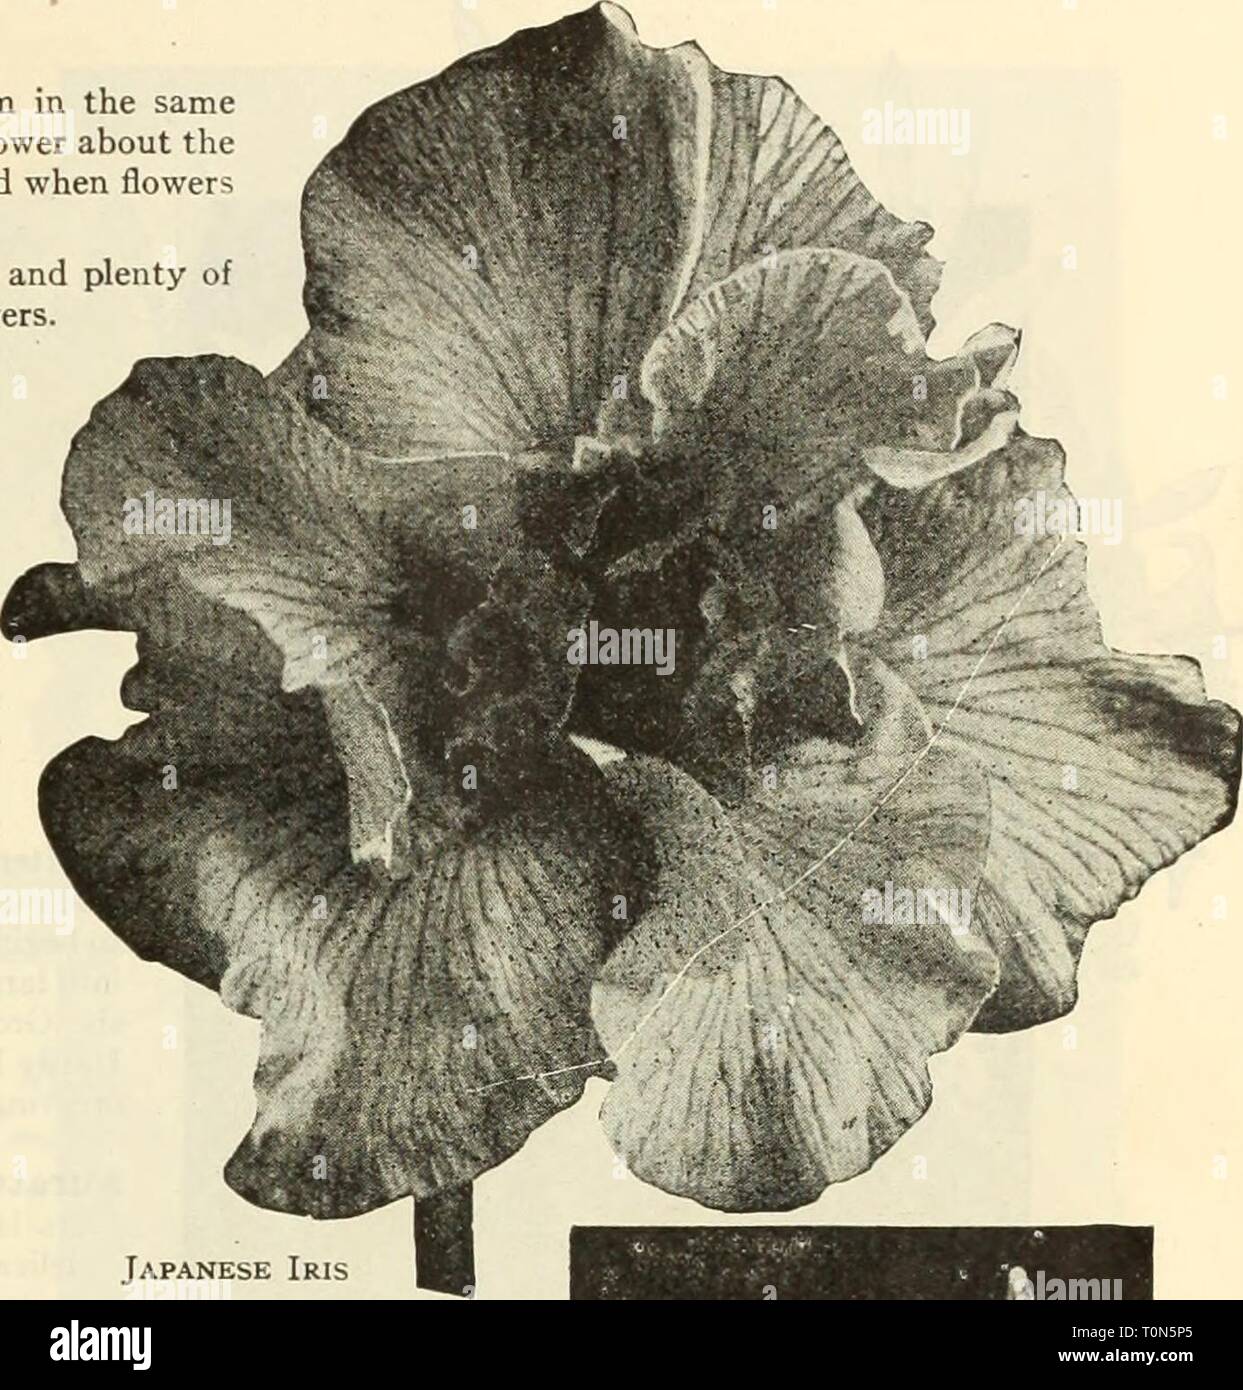 Dreer's autumn catalogue 1925 (1925) Dreer's autumn catalogue 1925  dreersautumncata1925henr Year: 1925  /flEHRyA-Mm^ ,BULBS SmiL PLANTING &gt;BlLBlEIiPMl| 25 Japanese Iris (ins Kaempferi) The improved forms of this beautiful flower have placed them in the same rank popularly as the Hardy Phloxes and Peonies. Coming into flower about the middle of June, and continuing for 3 to -1 weeks they fill in a period when flowers of this attractive type are particularly welcome. They succeed in almost any soil and position, but like rich soil and plenty of water when they are forming their buds and deve Stock Photo